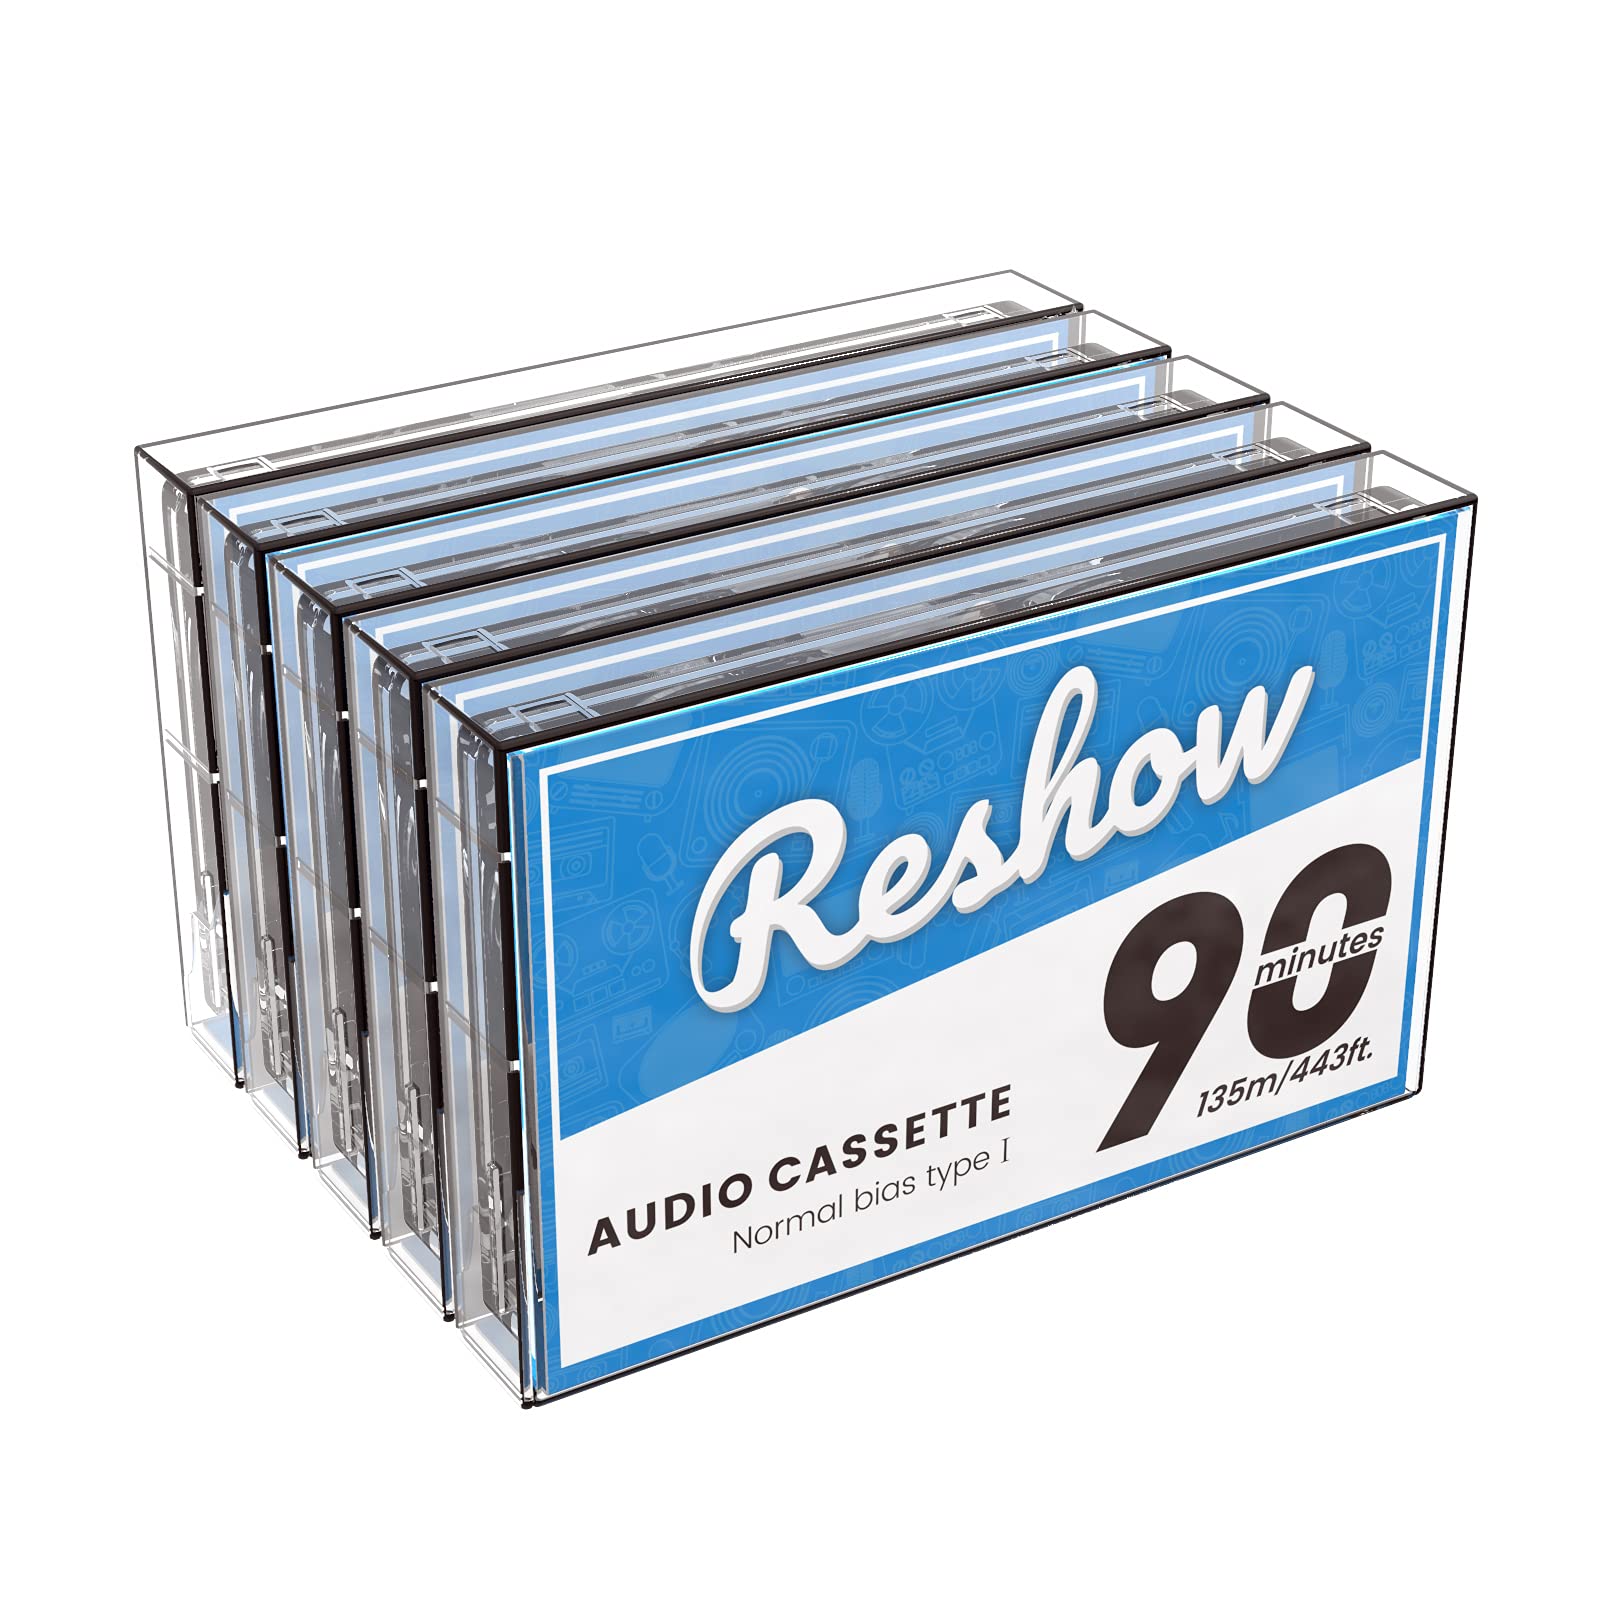 Reshow Audio cassettes Low Noise High Output 90 min Time Blank cassettes Tapes with Individual clear Plastic cassette Tape case,